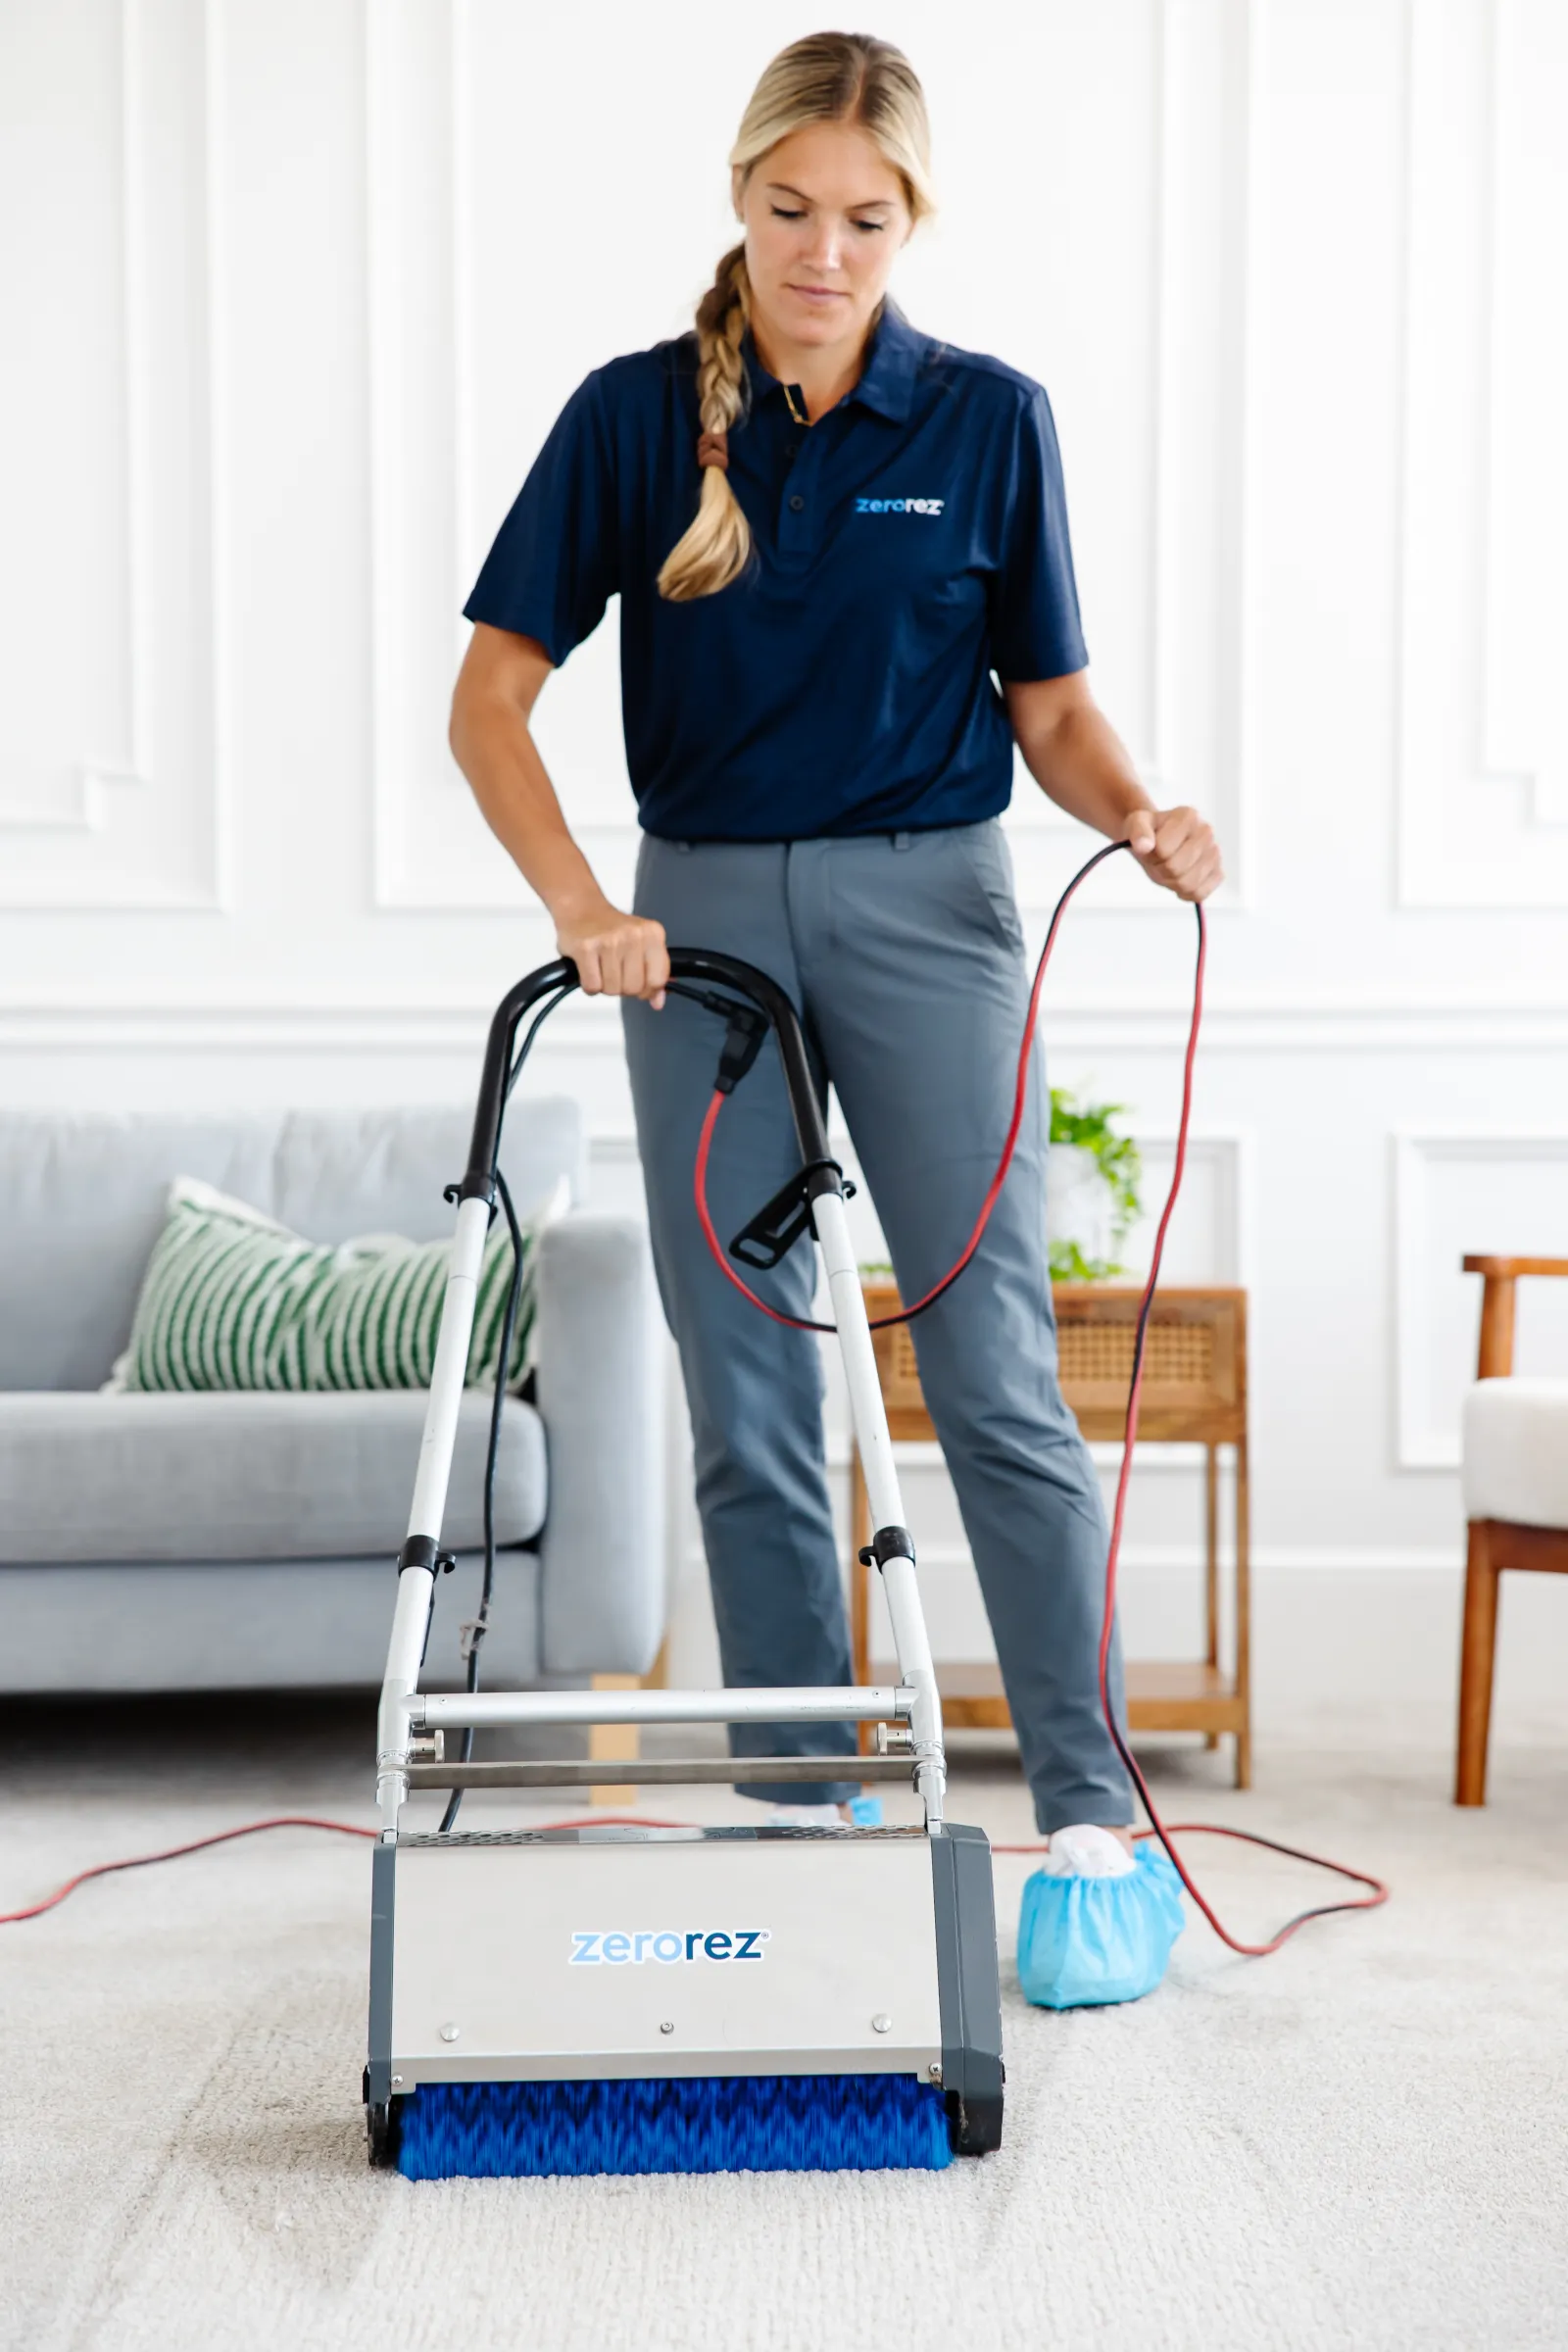 female Zerorez technician using a Zr™ Lifter to work in a pretreating carpet spray before cleaning the living room